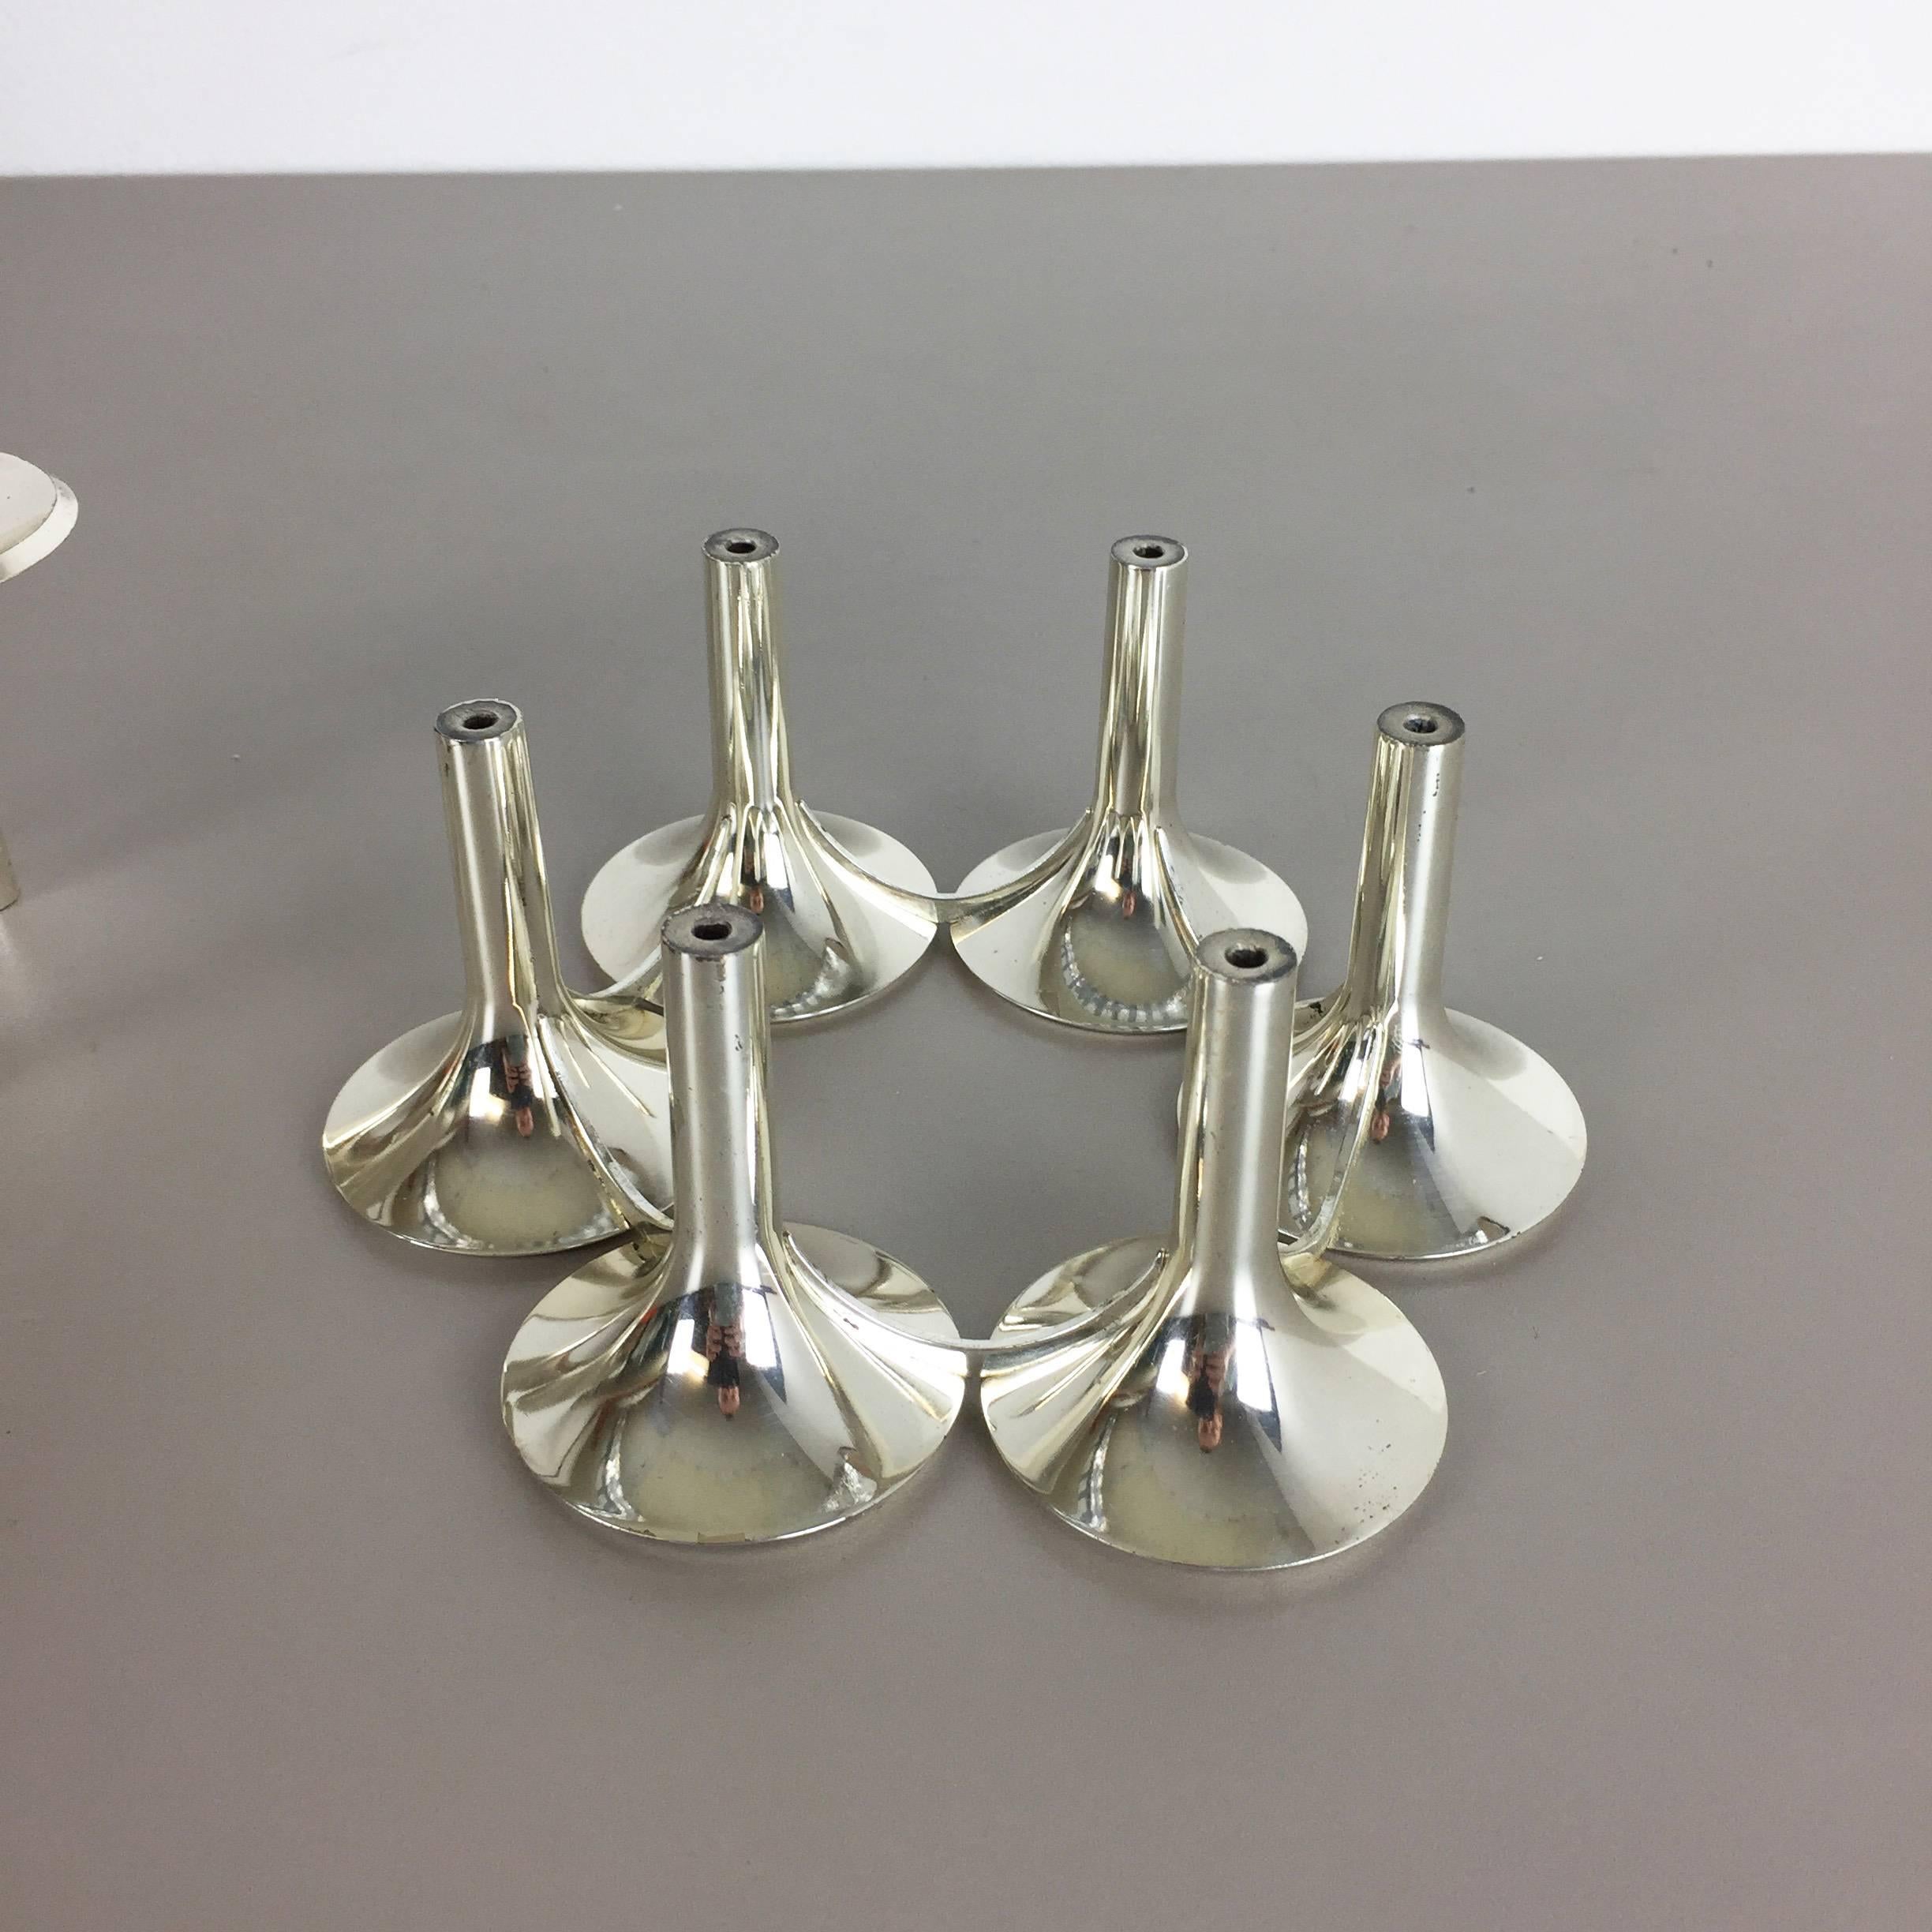 Set of Two Vintage 1970s Metal Chromed Candleholder Elements Made in Germany 1